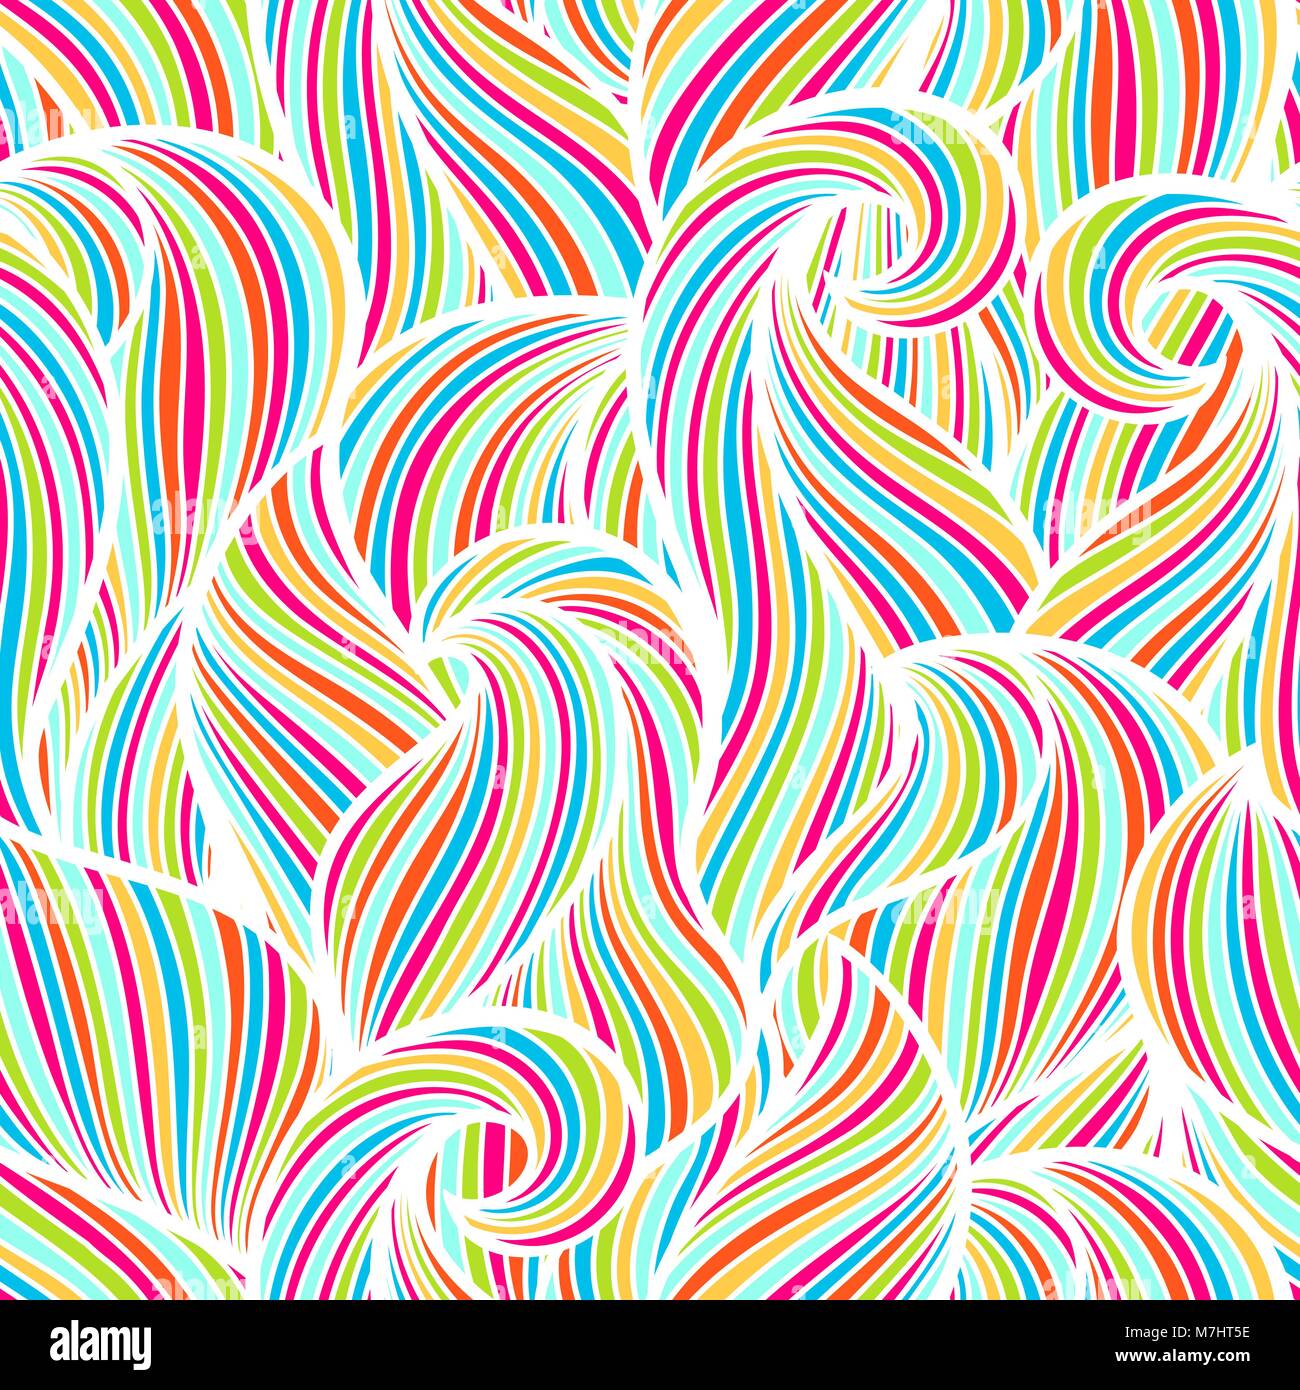 Wavy curled seamless pattern. Abstract outline colorful texture Stock Vector